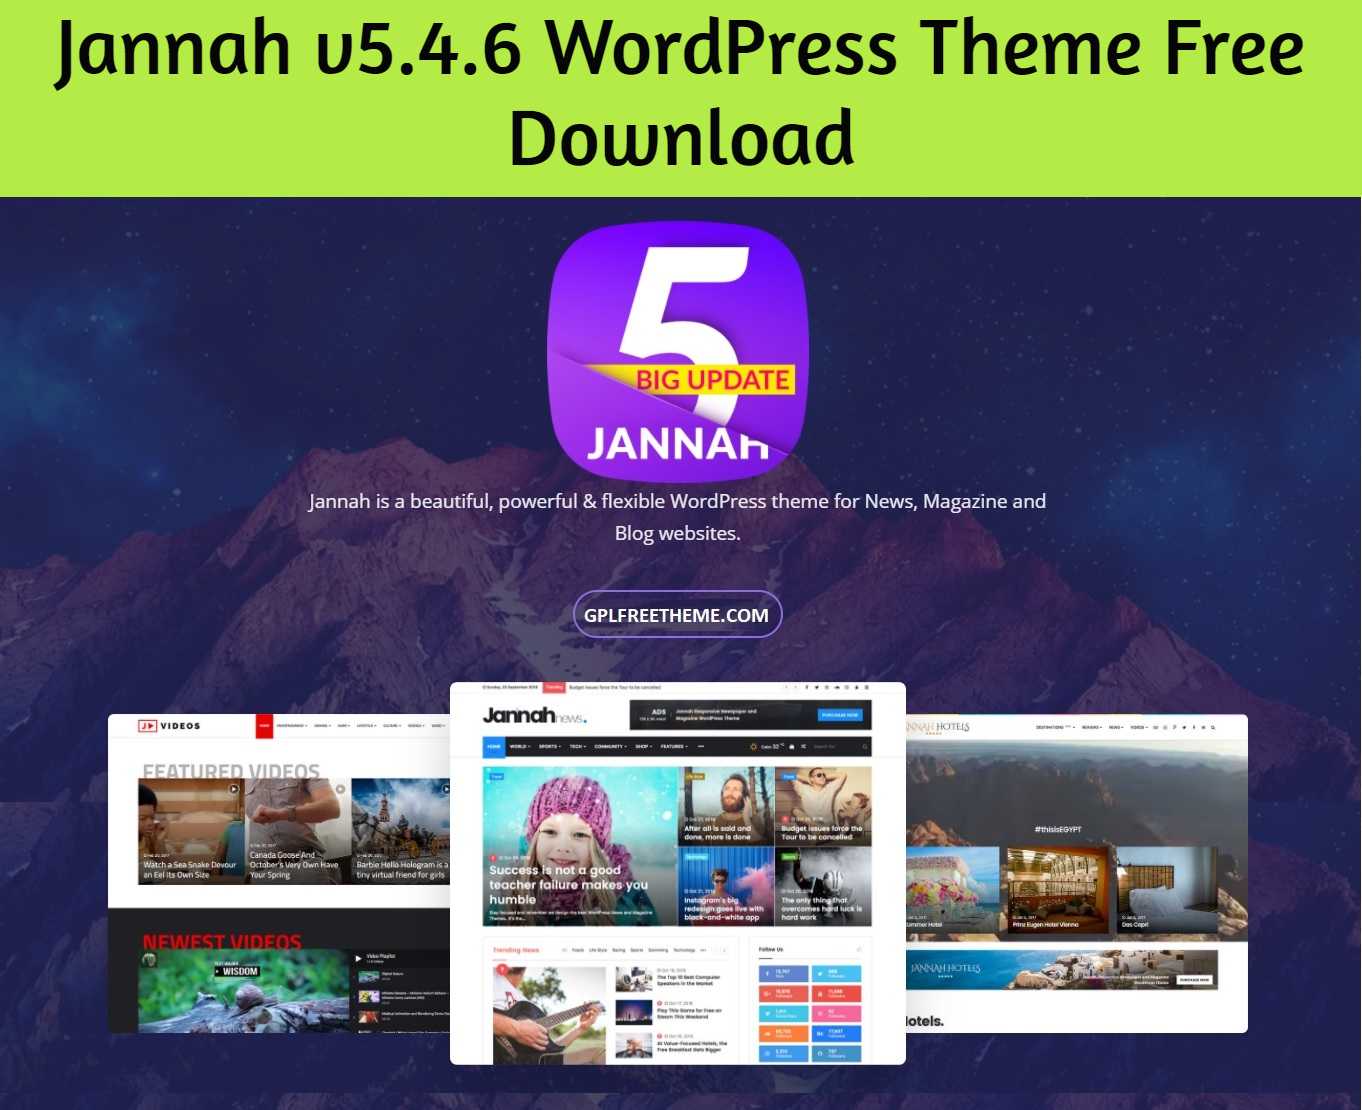 Jannah v5.4.6 WordPress Theme Free Download [Activated]